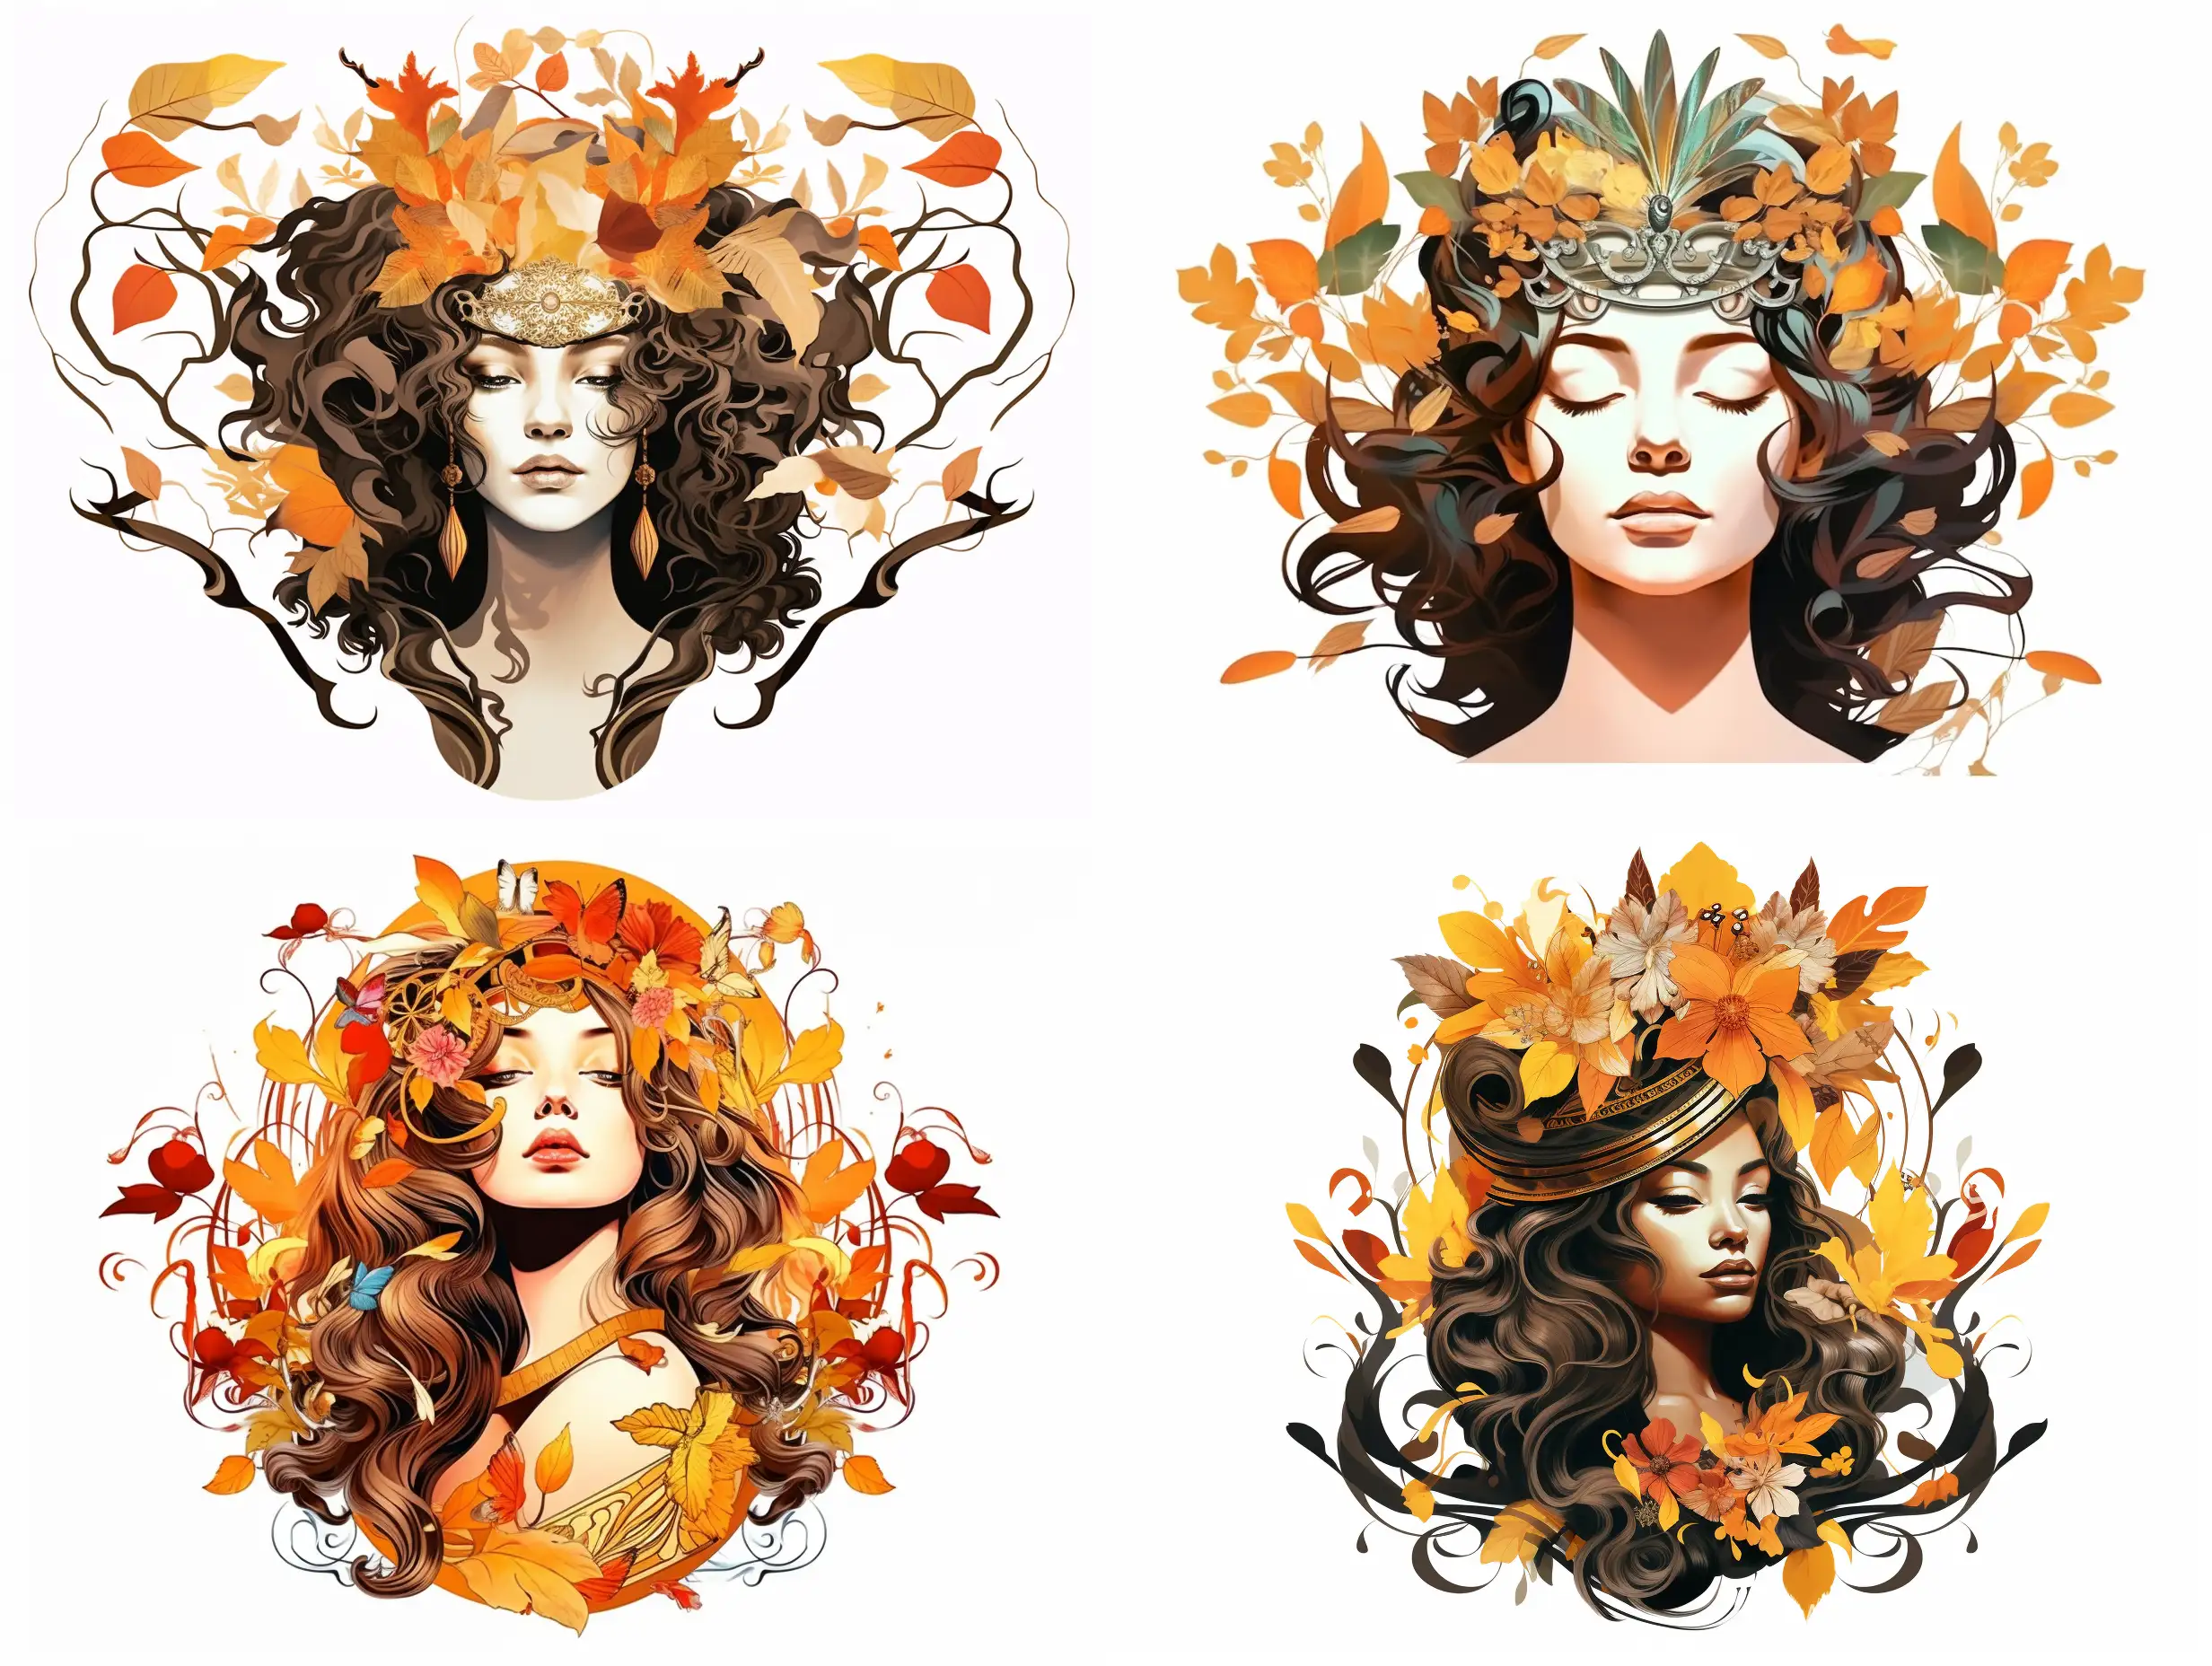 Ancient-French-Queen-in-Victor-Ngai-Style-Stylized-Caricature-with-Autumn-Leaves